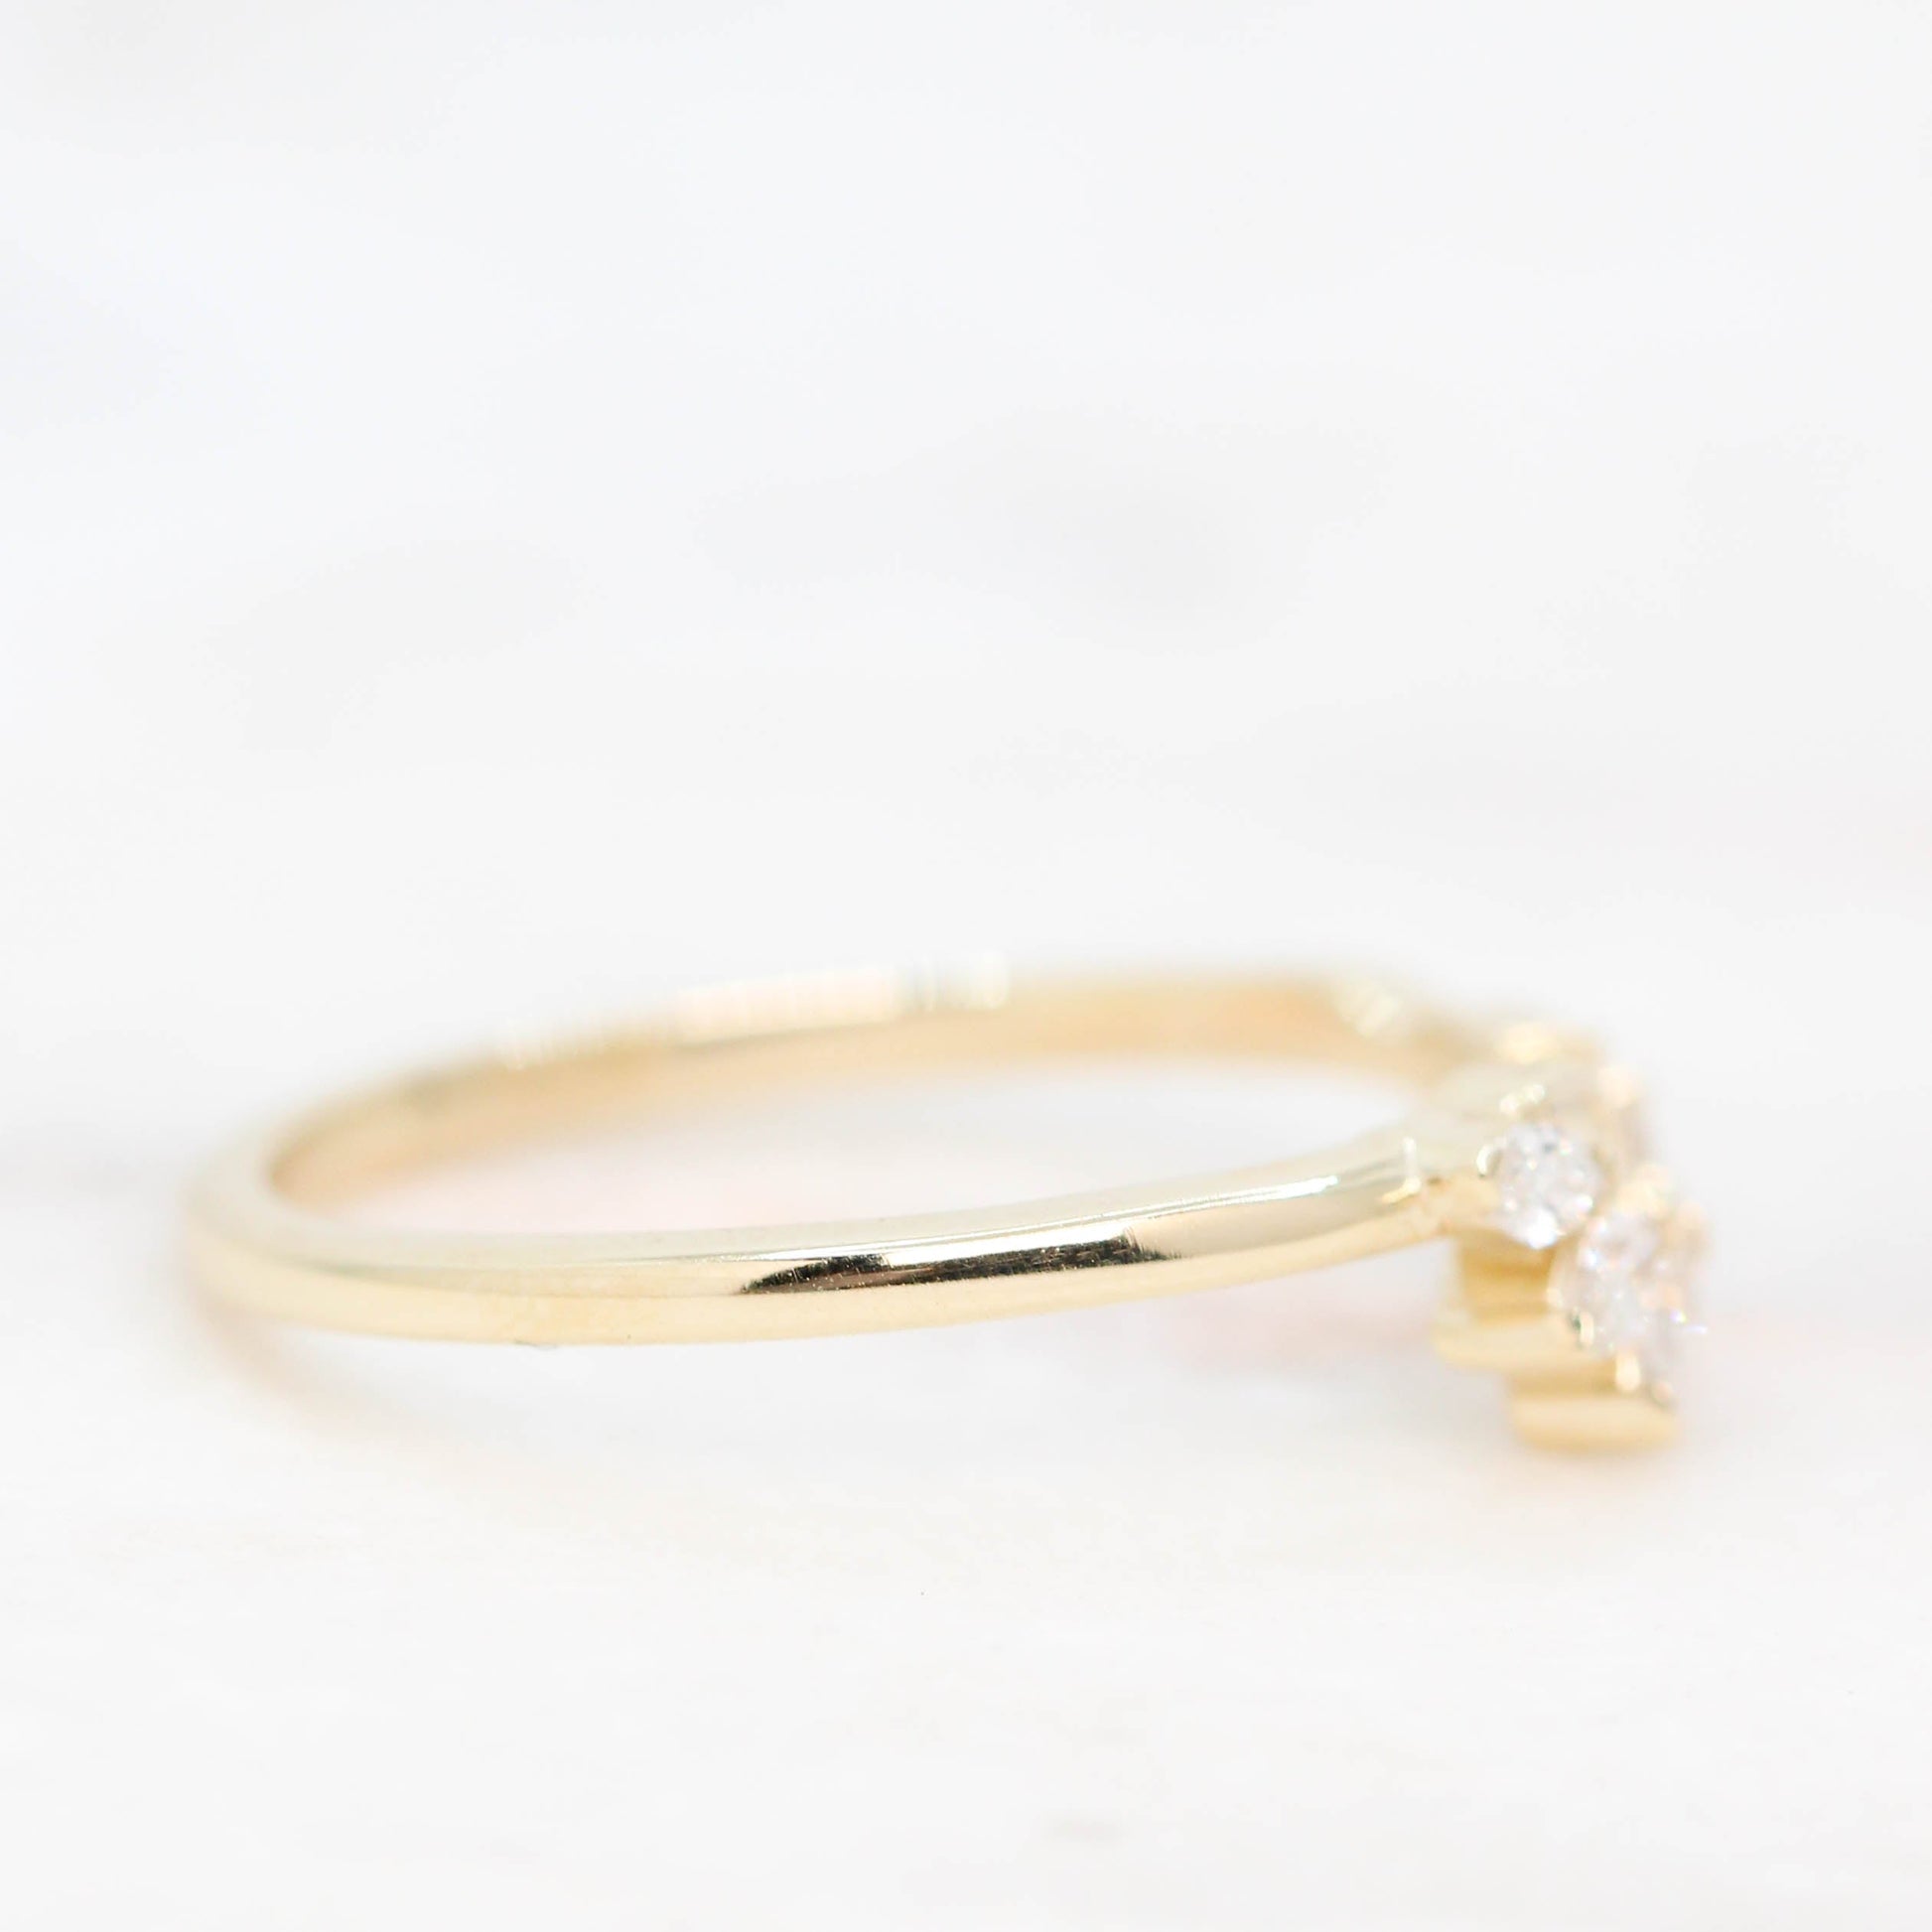 Samantha - (J) Talaria Wedding Band - Asymmetrical Contour Band - Made to Order, Choose Your Gold Tone - Midwinter Co. Alternative Bridal Rings and Modern Fine Jewelry